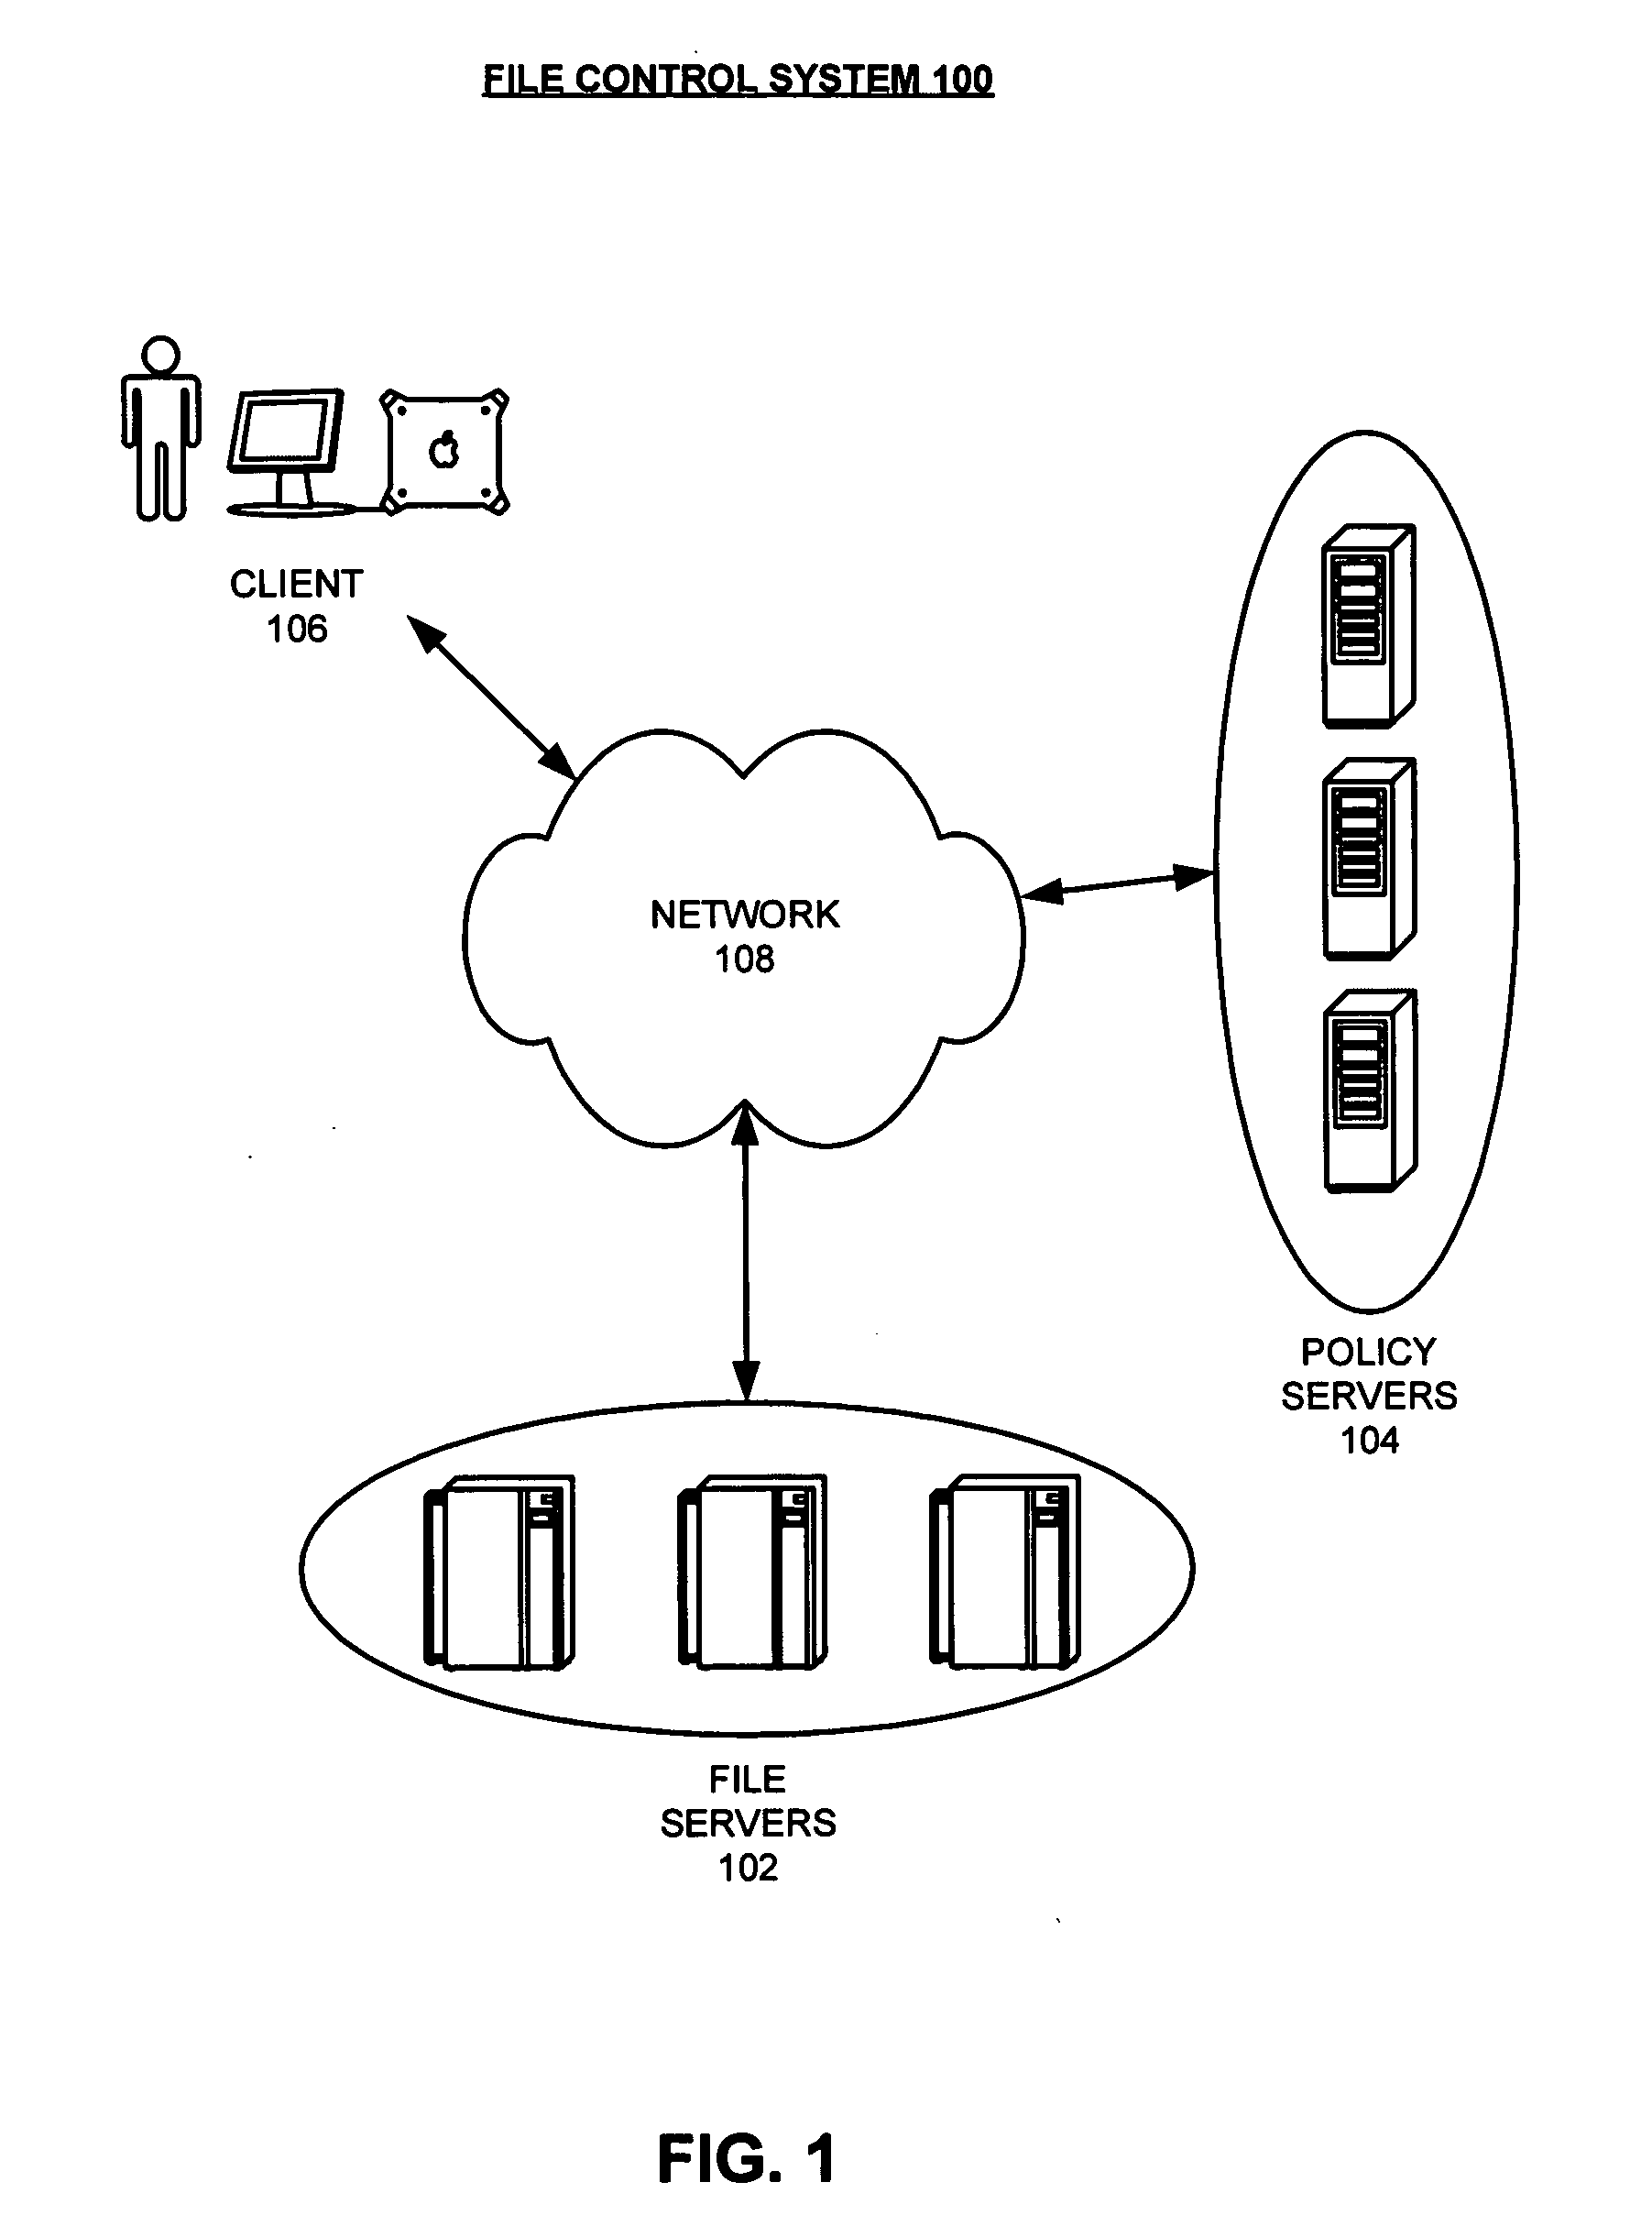 Method and apparatus for combining encryption and steganography in a file control system